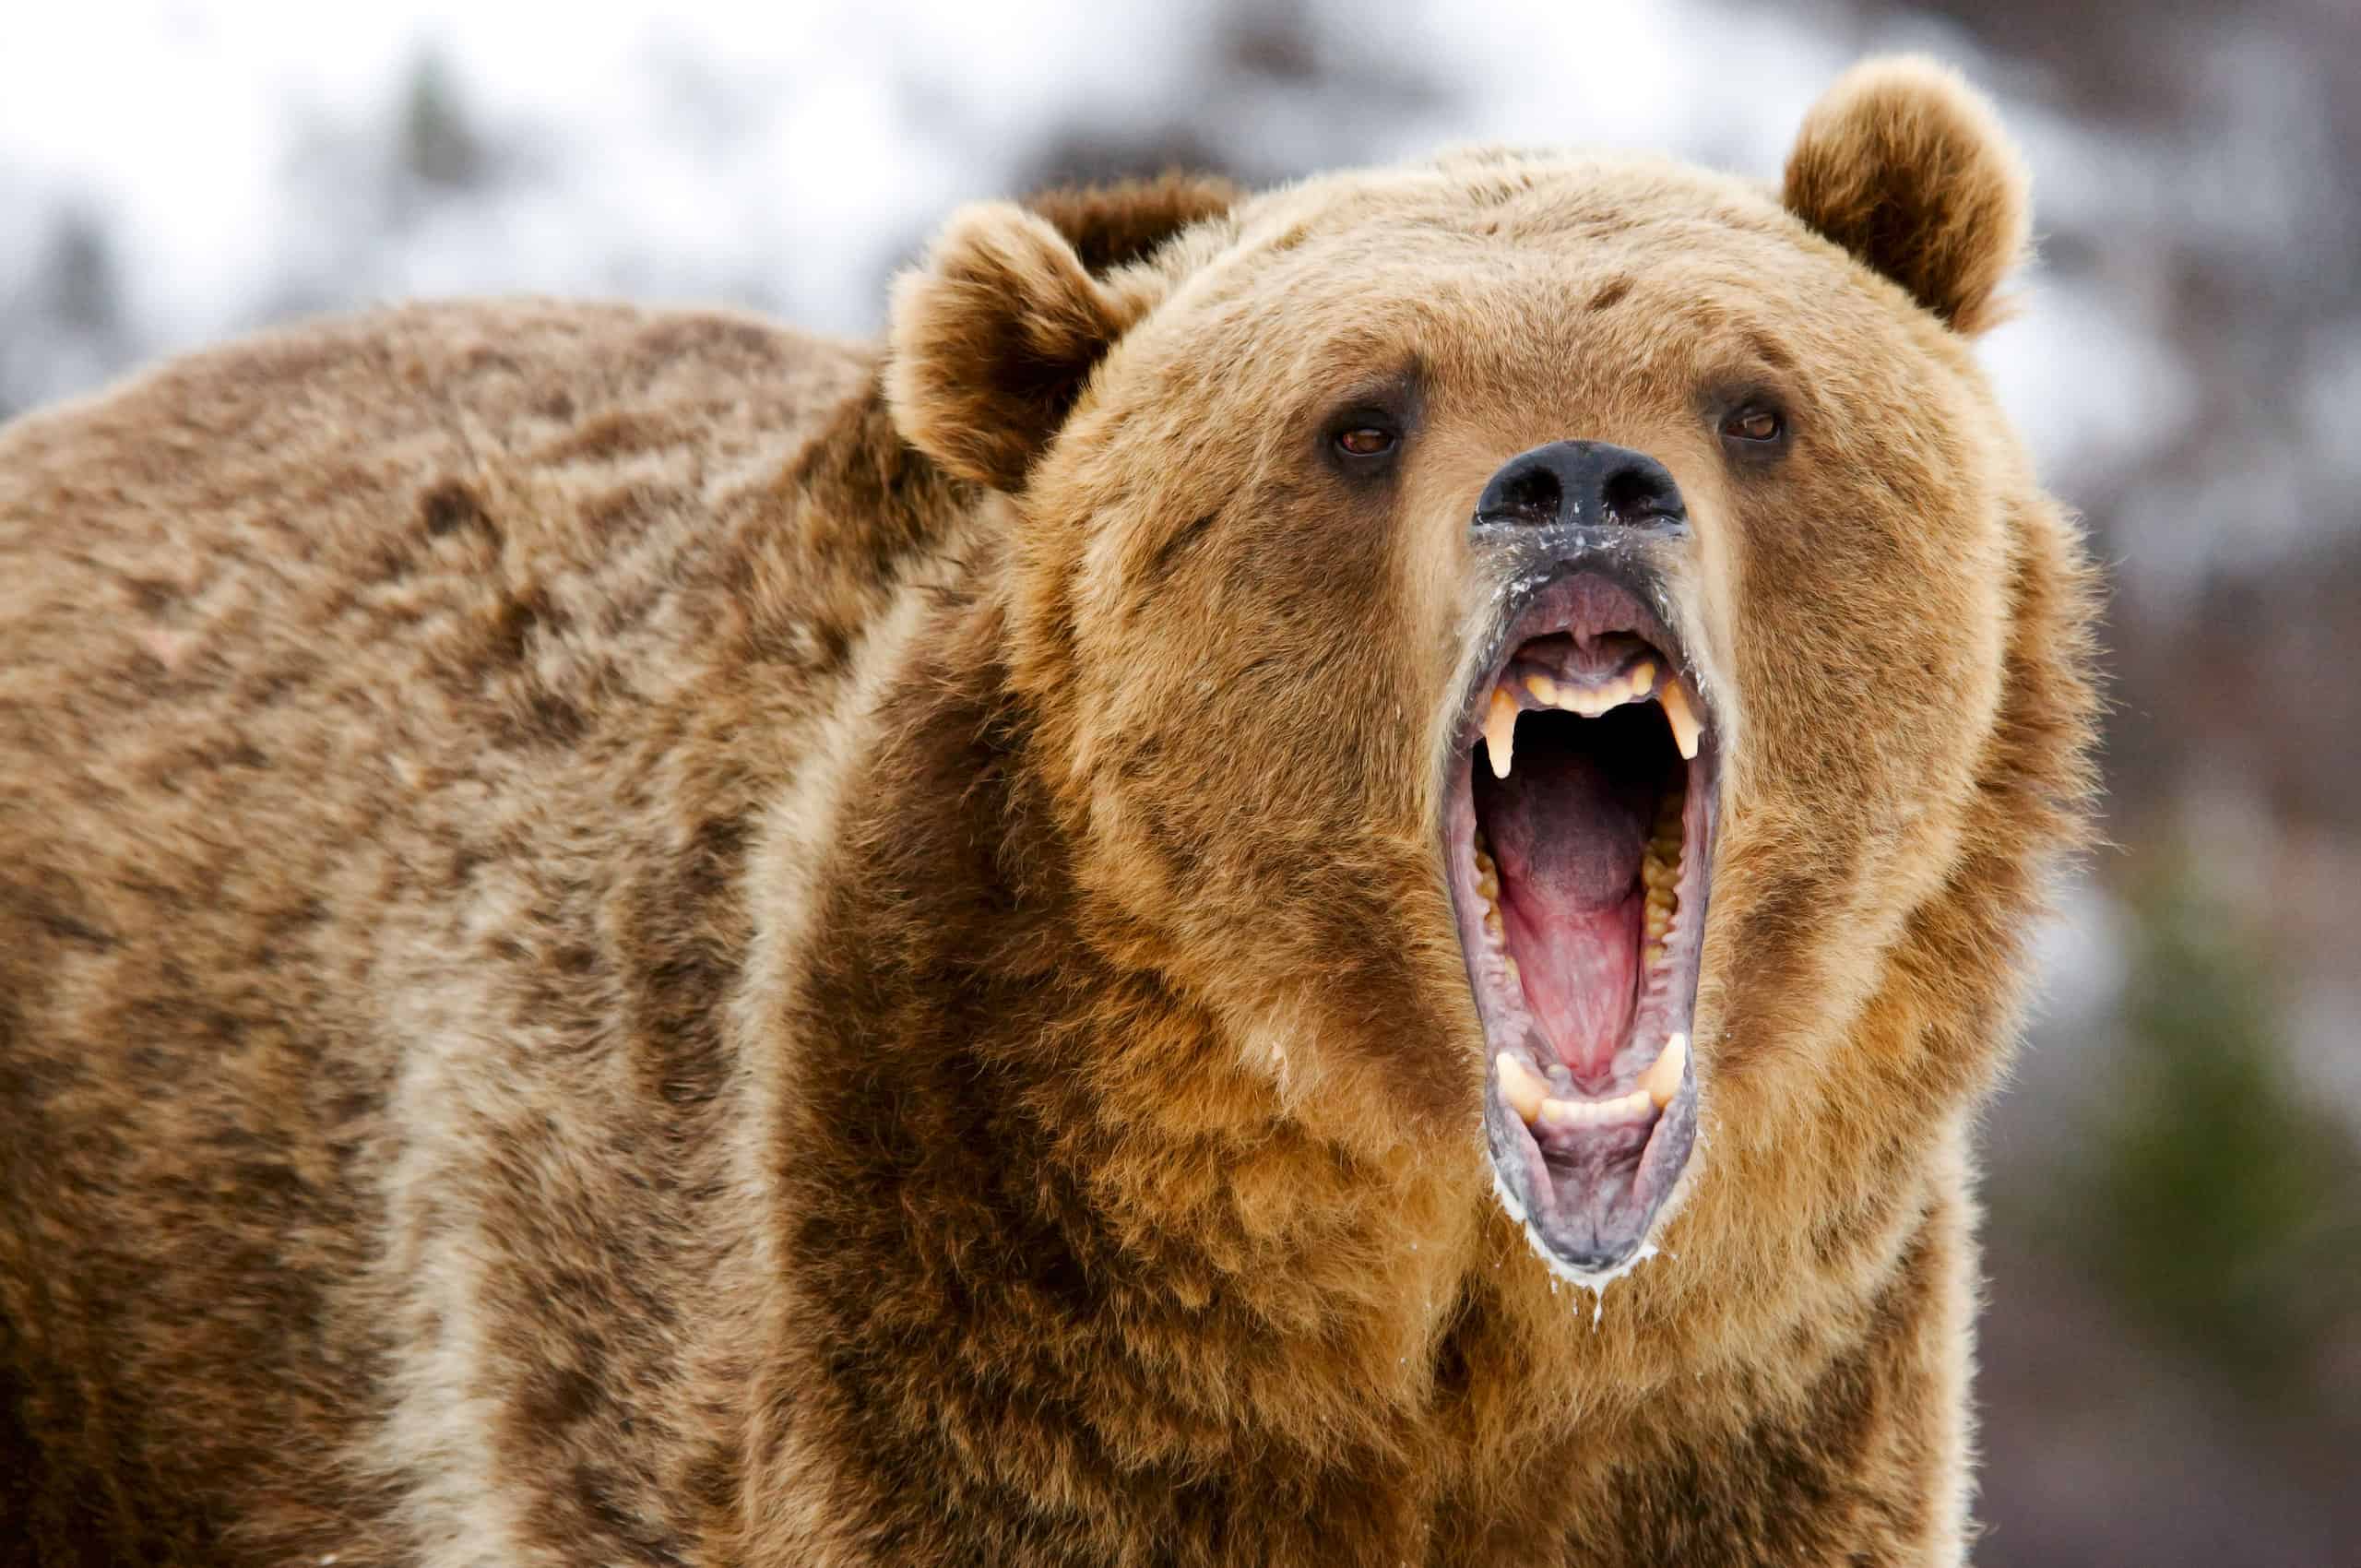 How many grizzly bear attacks in Banff?